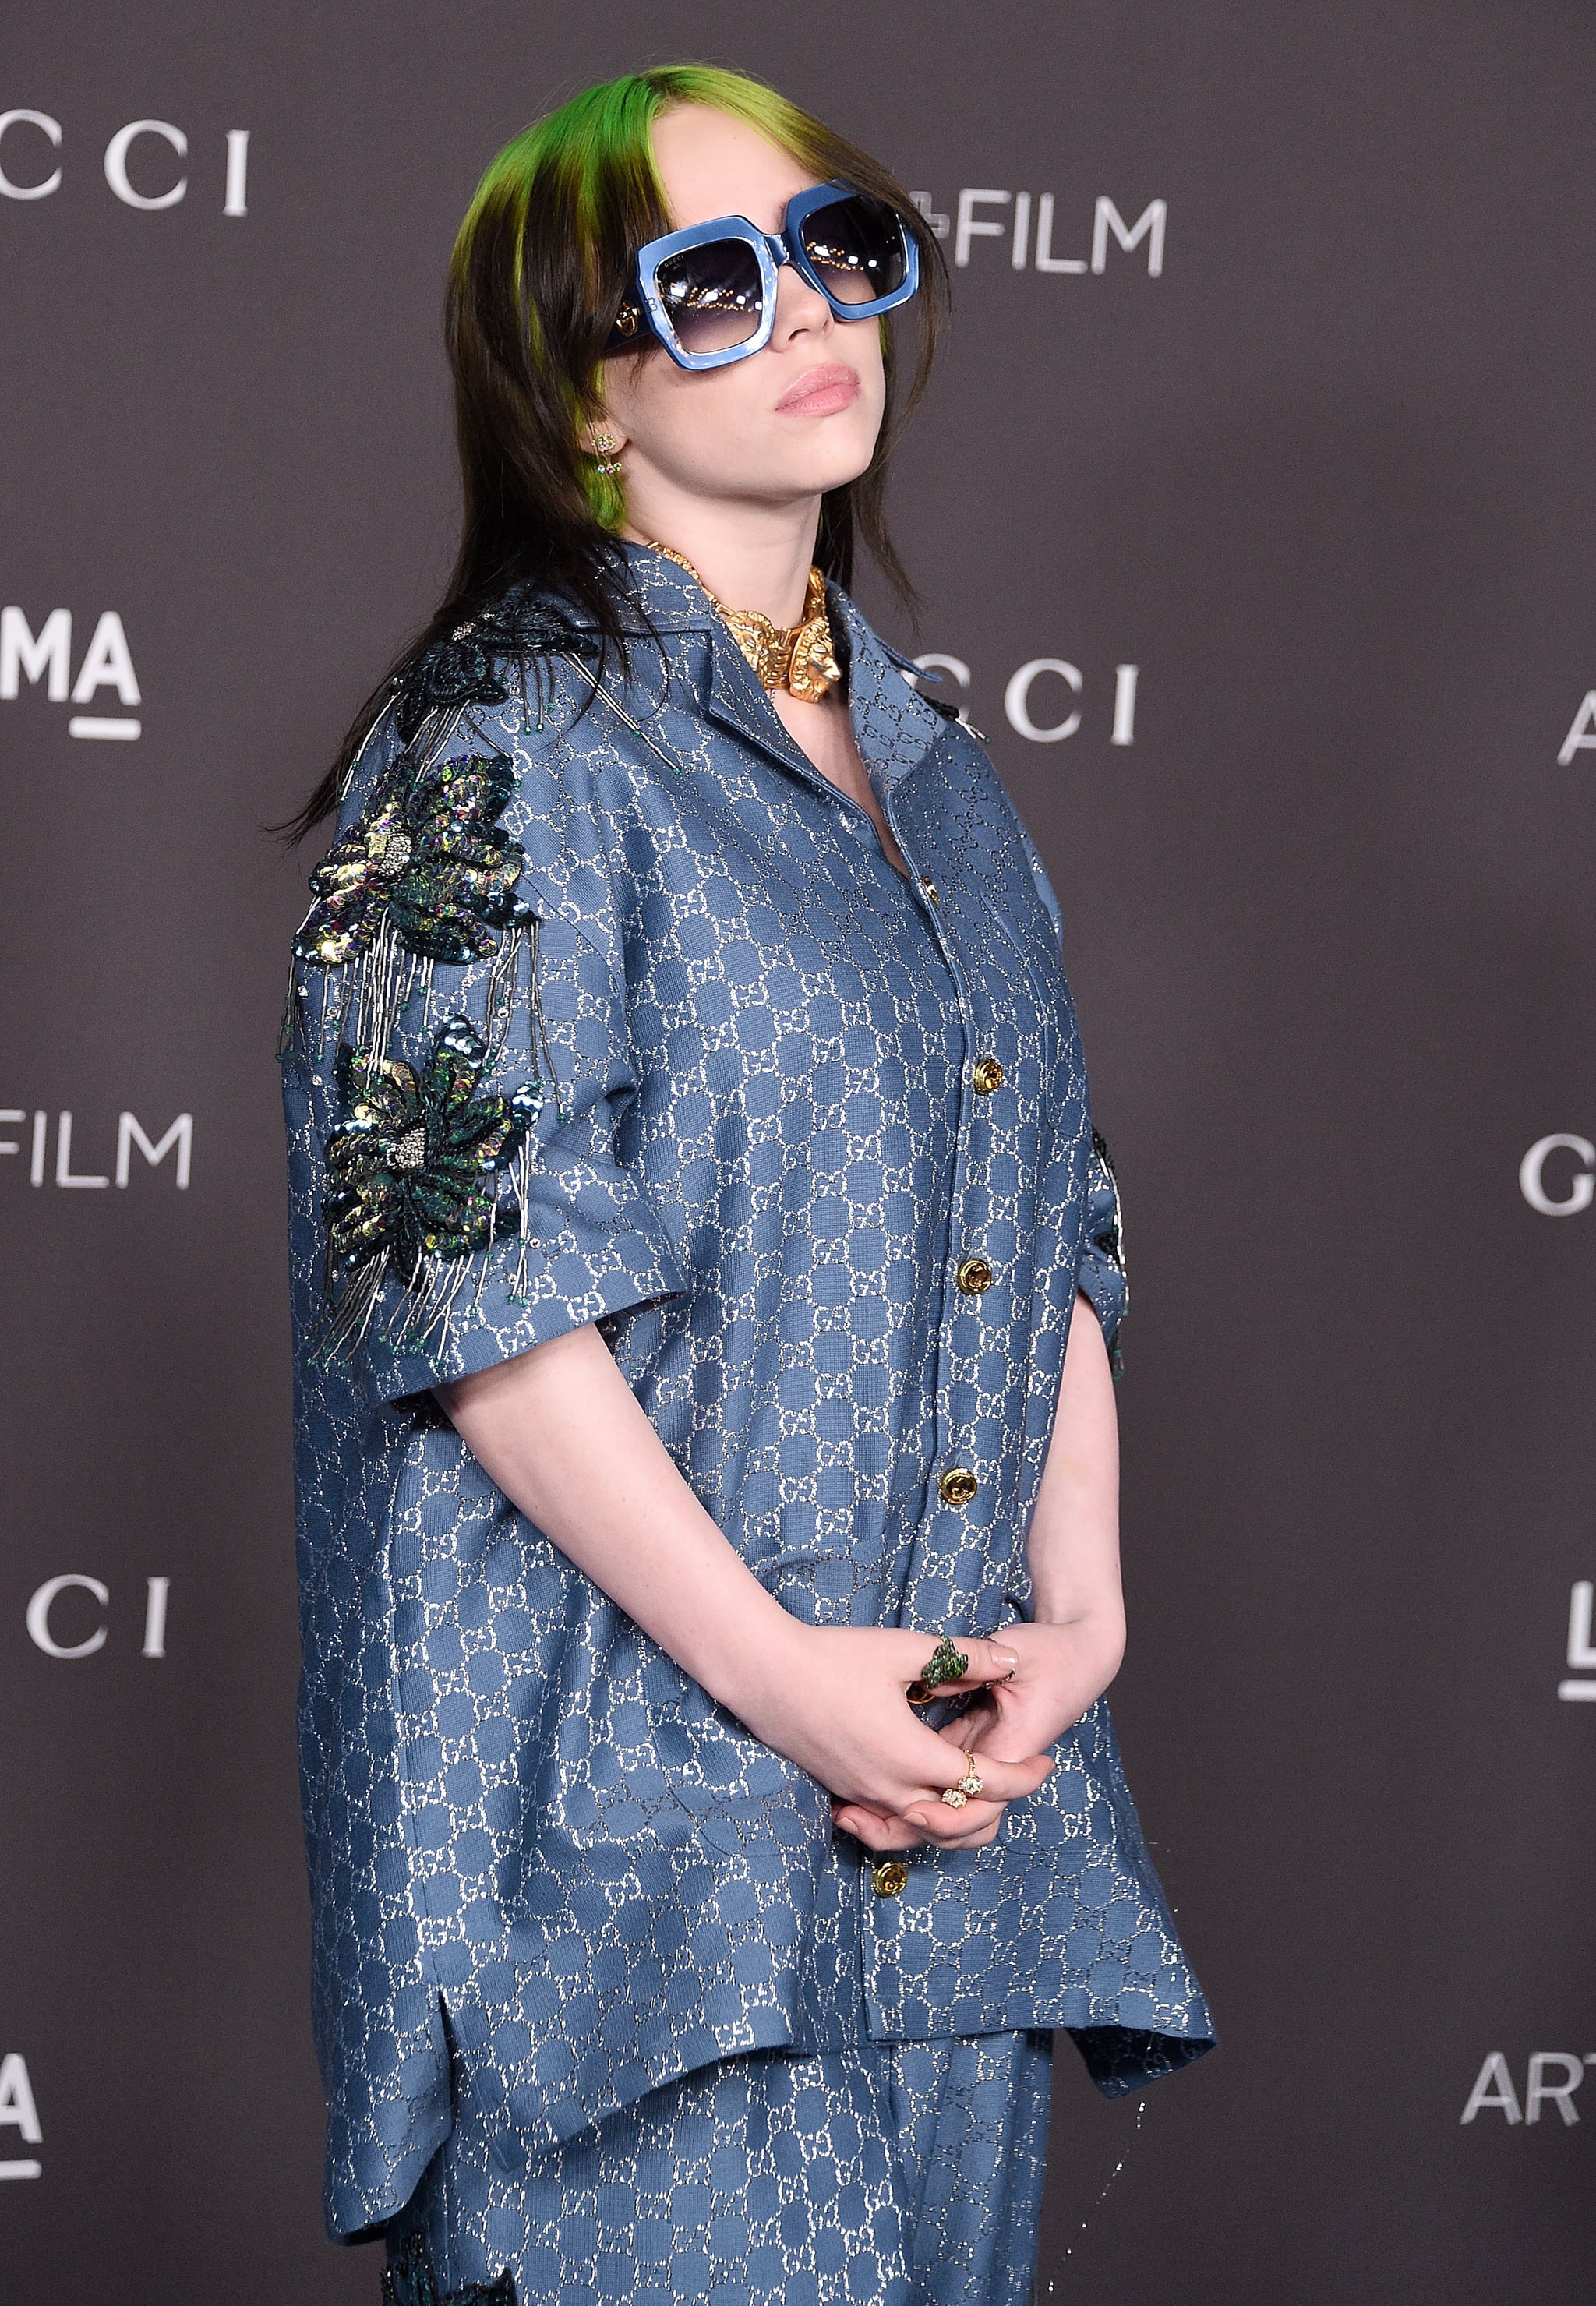 Fashion, Shopping & Style | Billie Eilish Wore Head-to-Toe Gucci and Looked  Like a Total Badass | POPSUGAR Fashion Photo 7